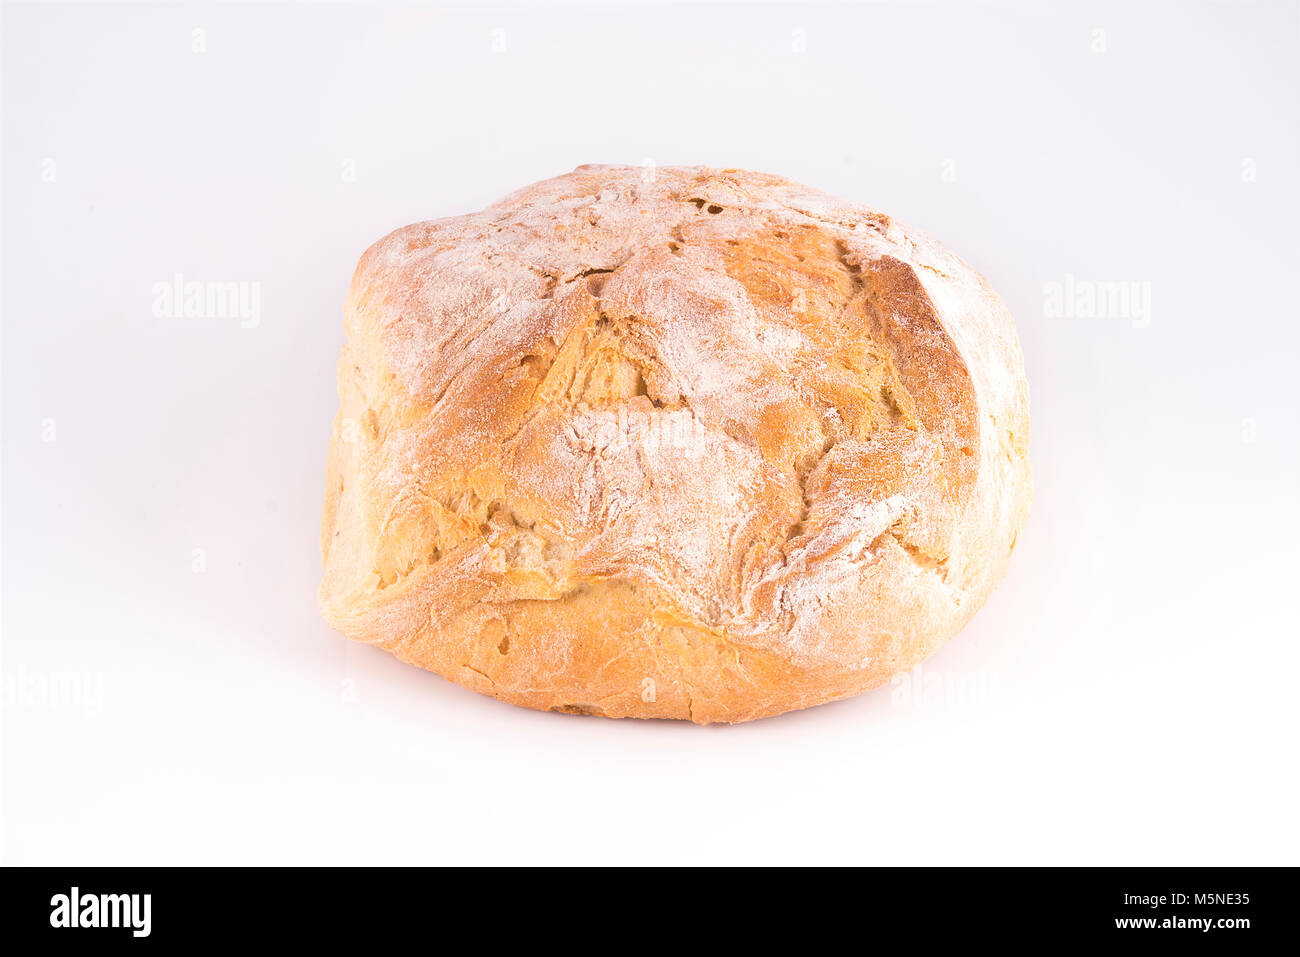 a loaf of bread on a white surface Stock Photo